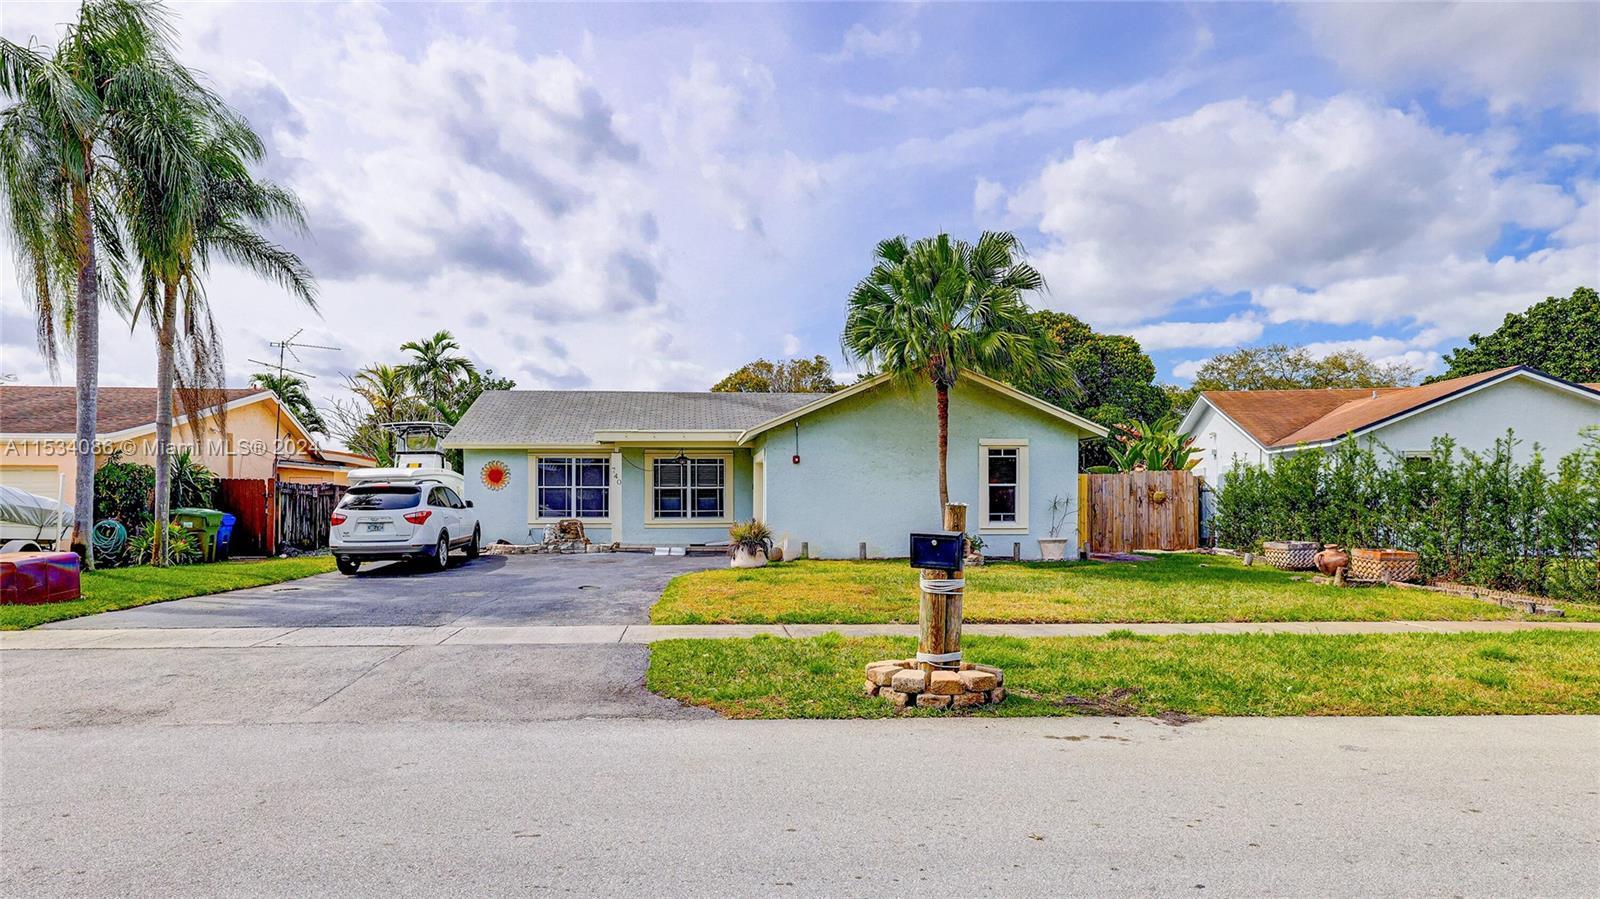 Photo of 740 NW 85th Wy in Pembroke Pines, FL